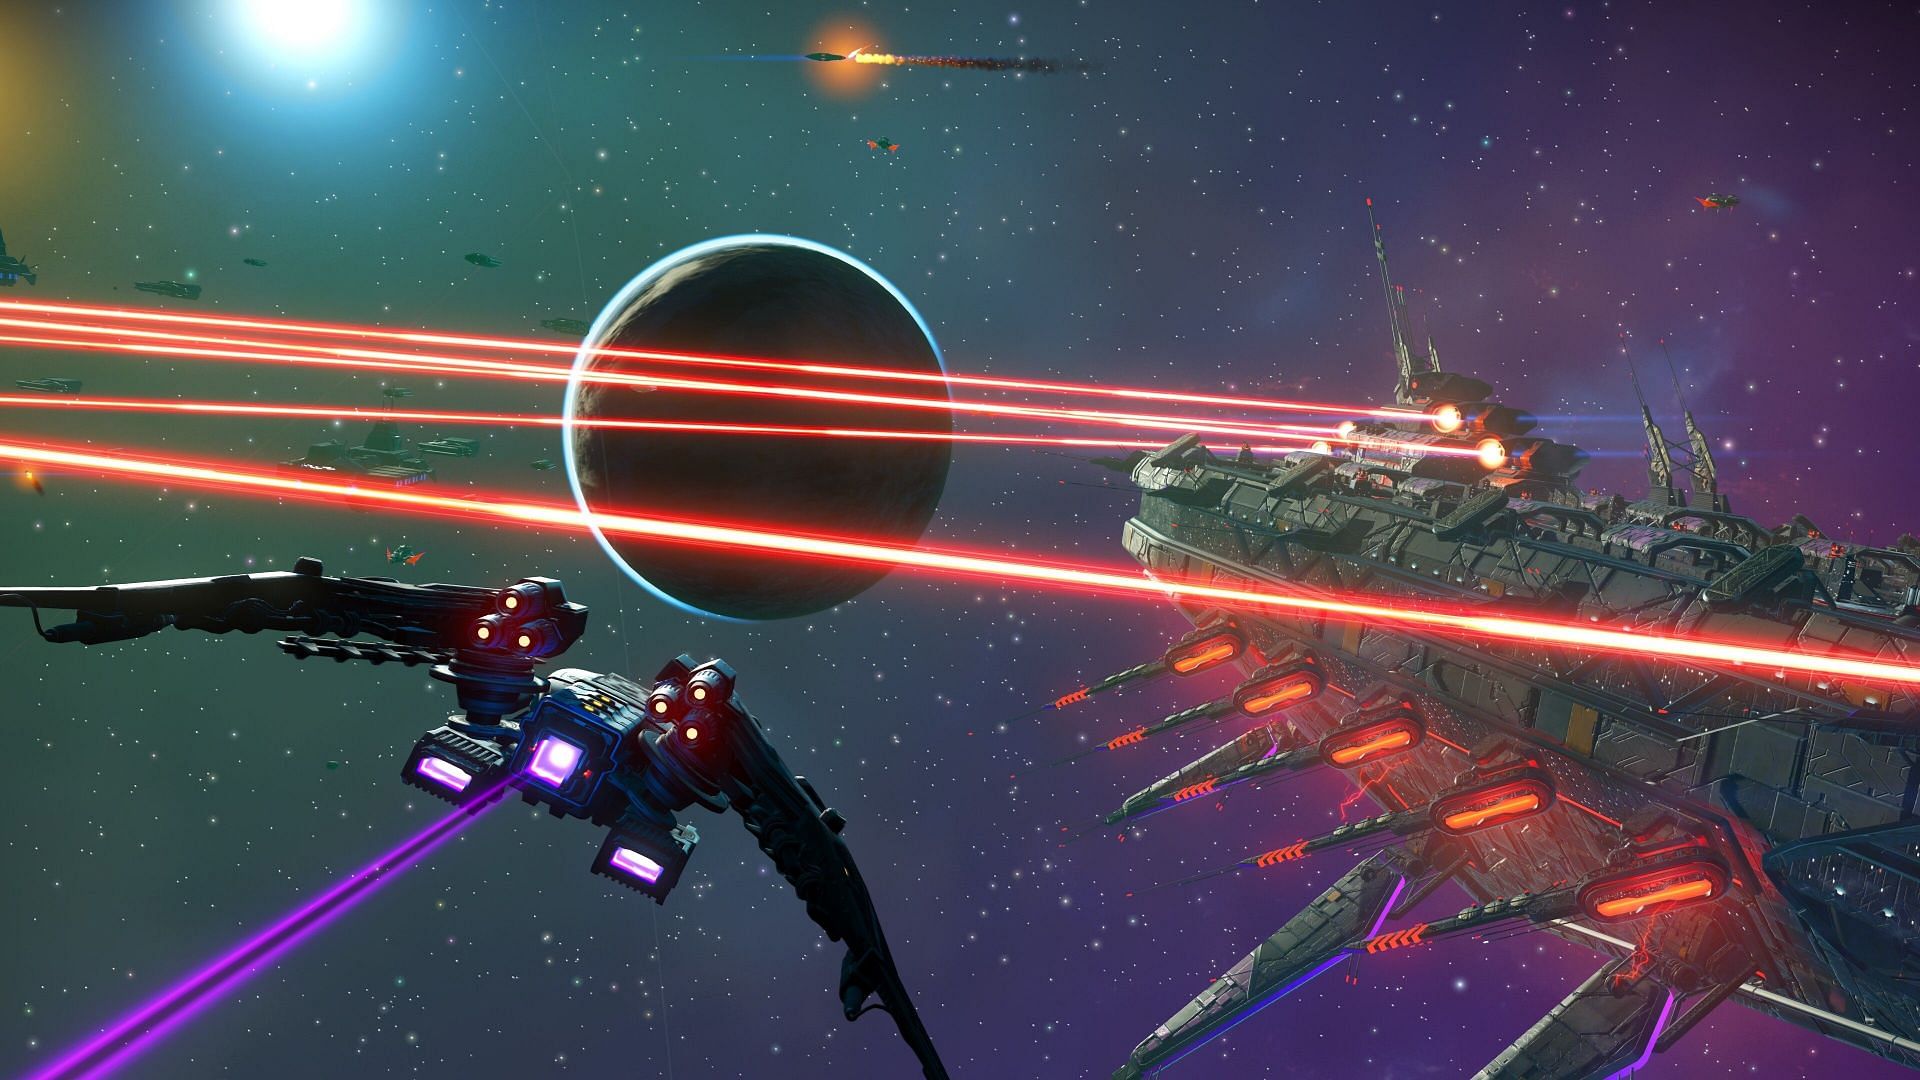 spaceships fighting with a sentinel dreadnaught in space